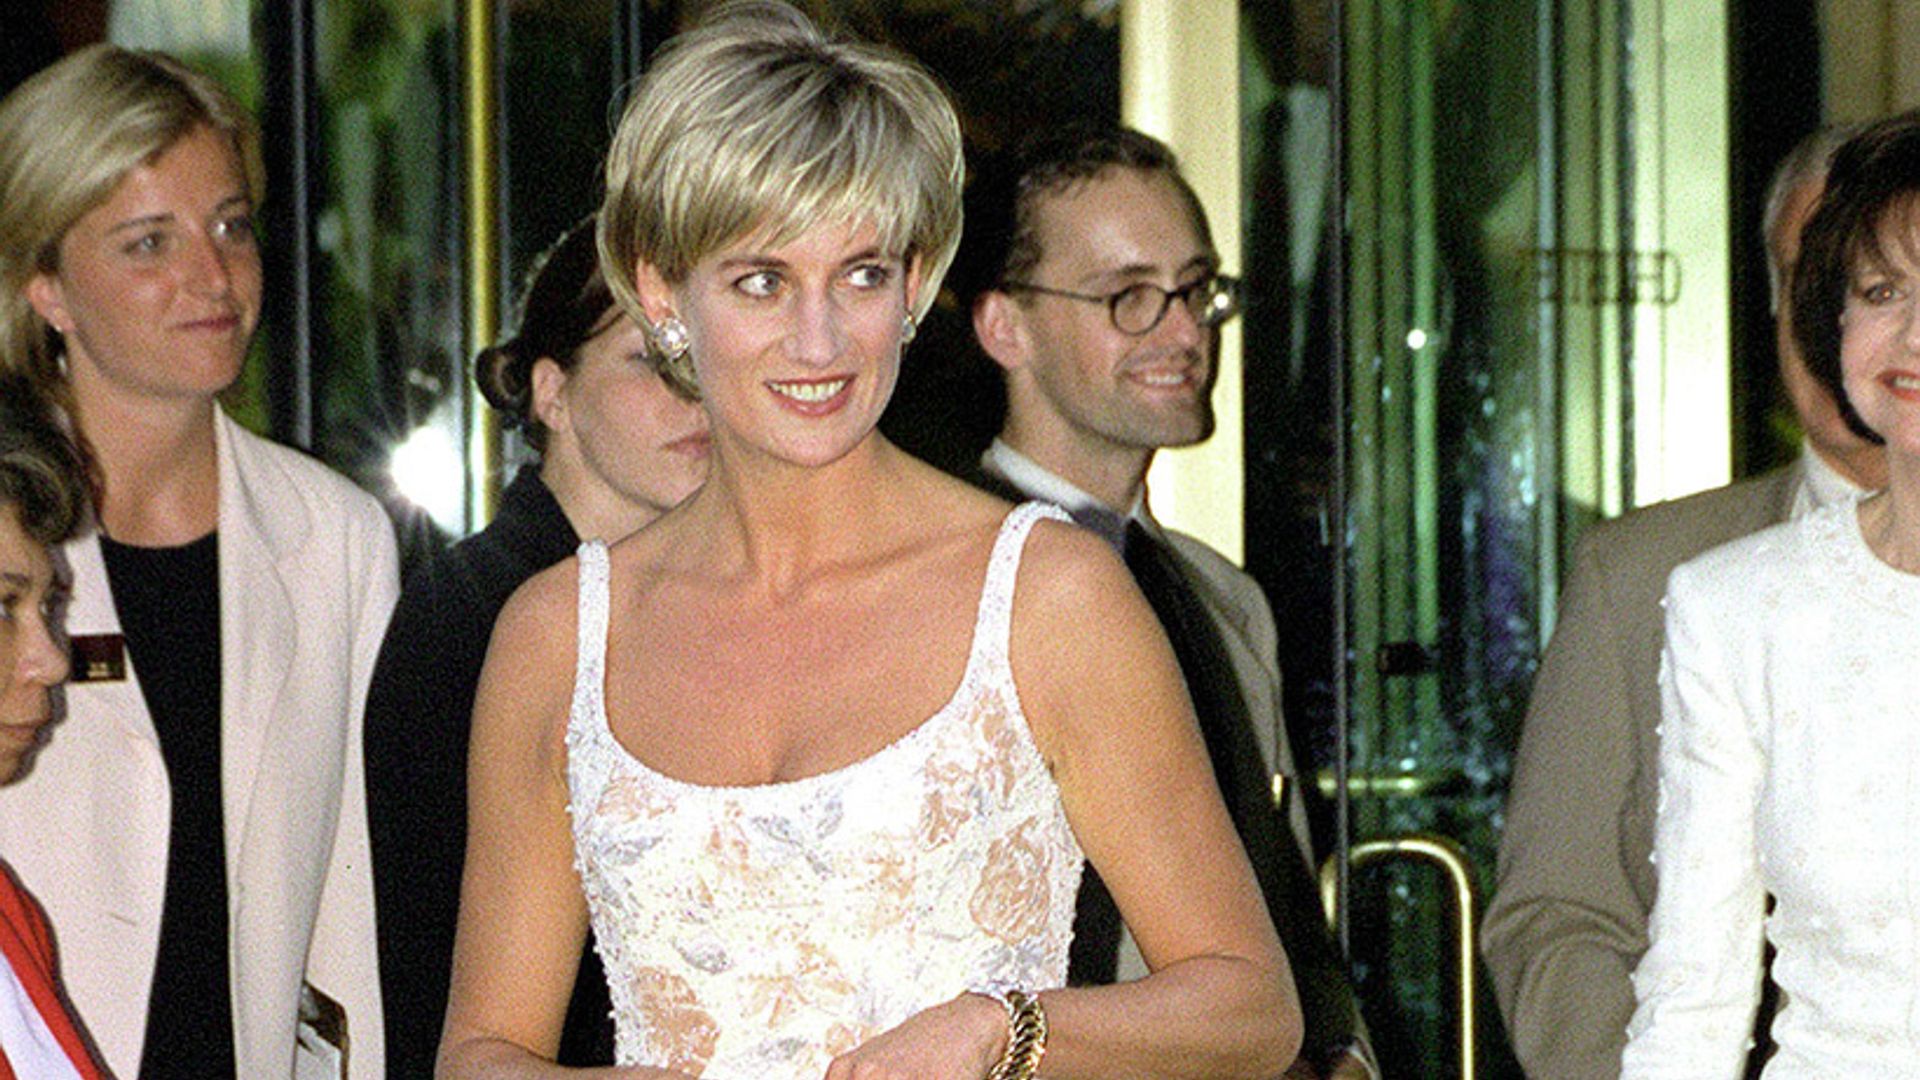 Jimmy Choo reveals last pair of shoes he designed for Princess Diana